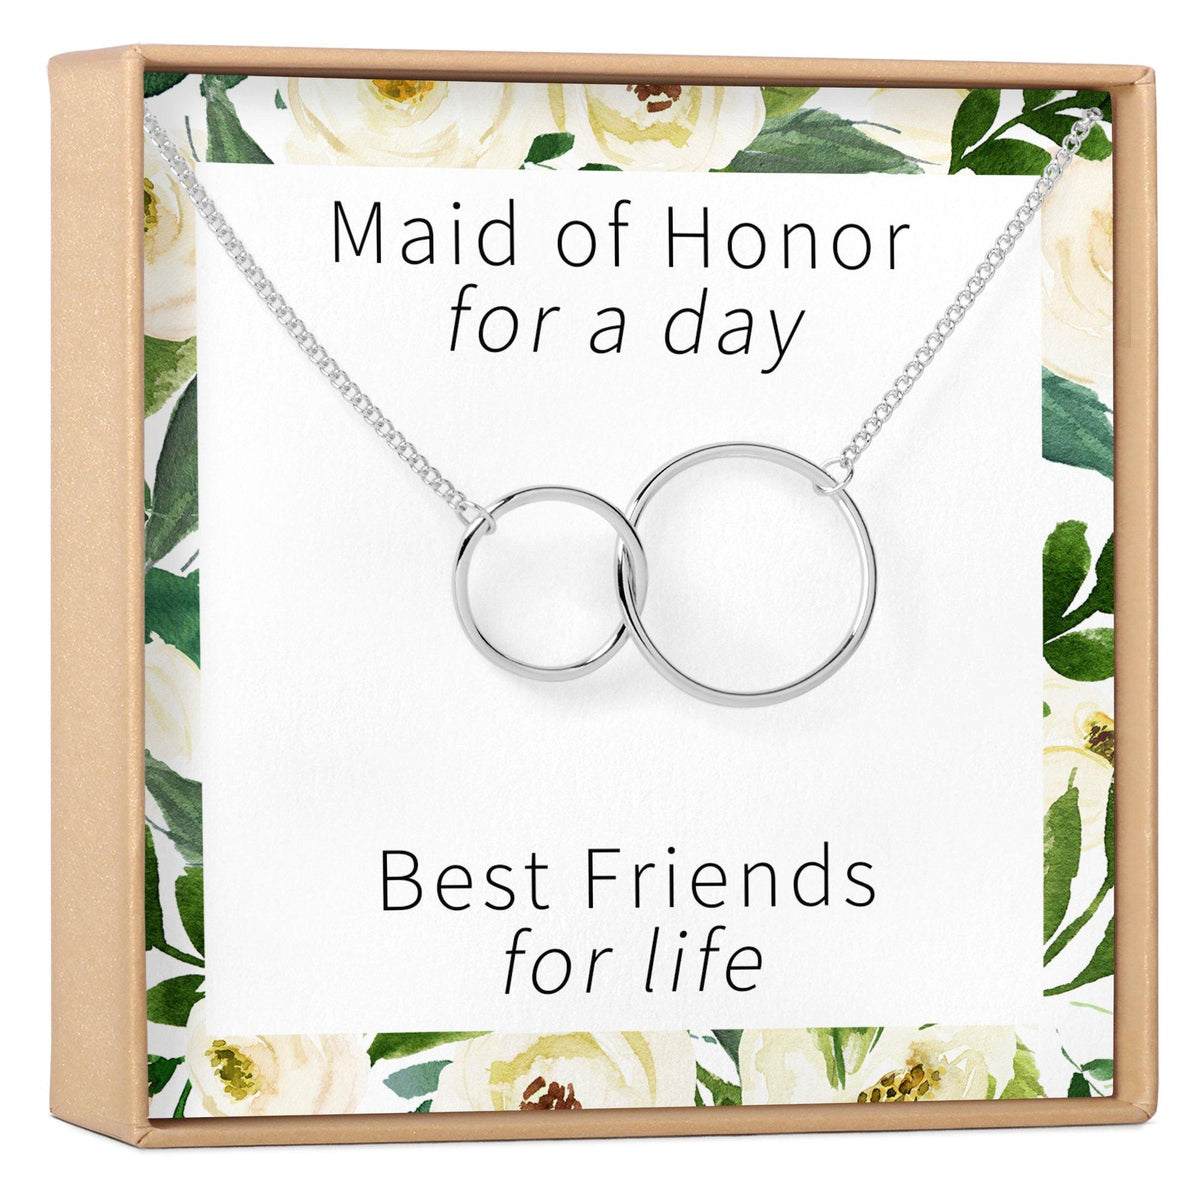 Maid of Honor Necklace - Dear Ava, Jewelry / Necklaces / Pendants